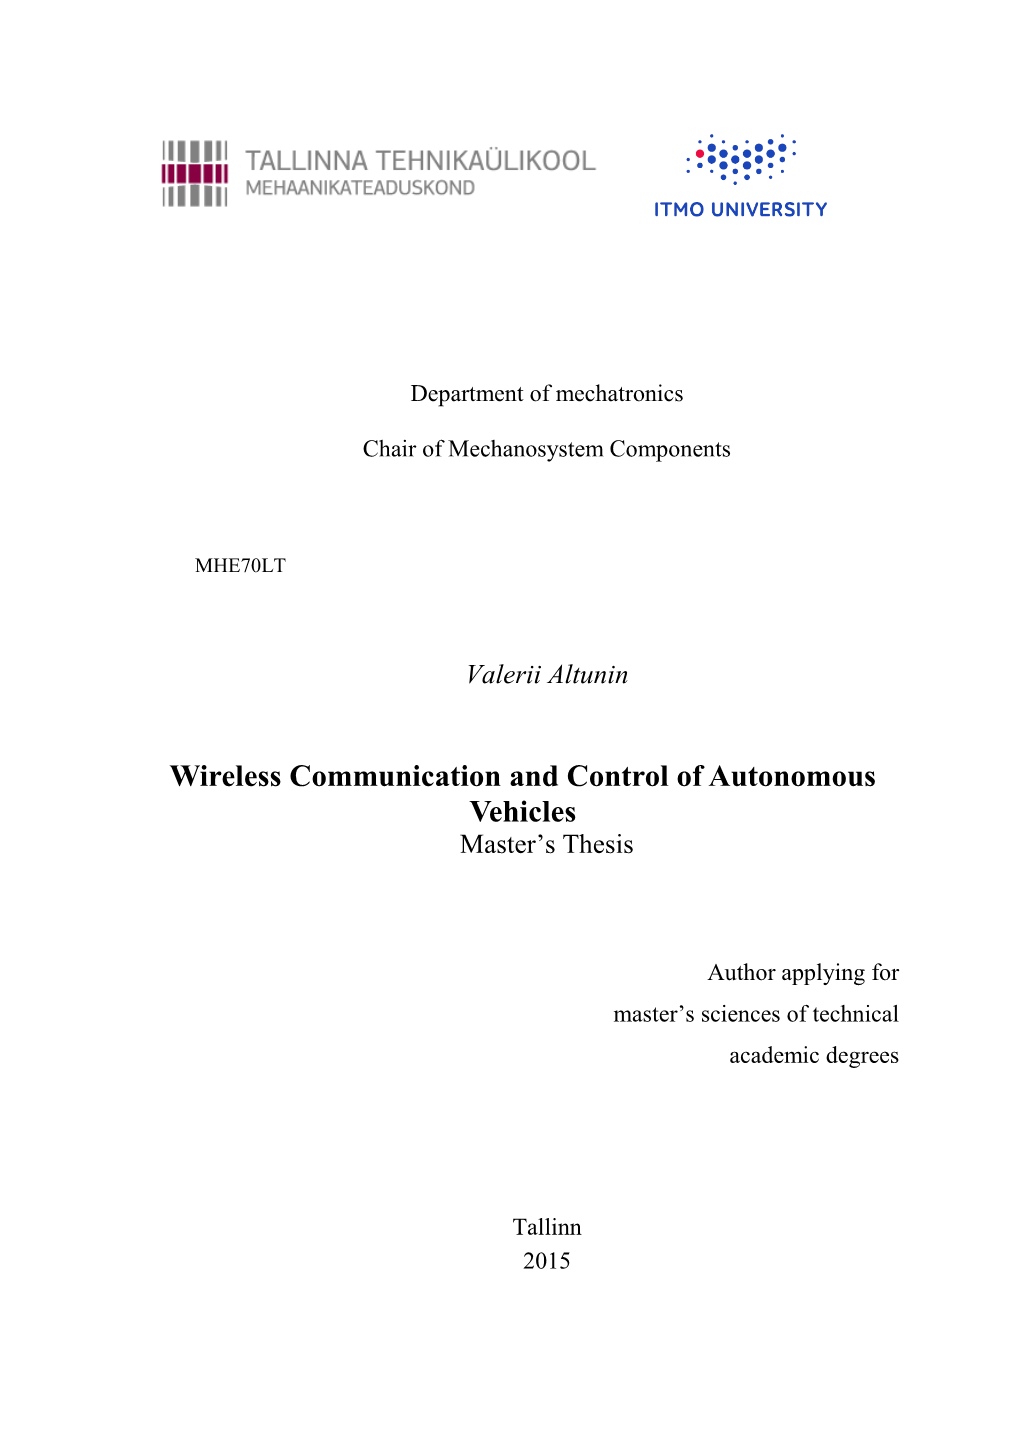 Wireless Communication and Control of Autonomous Vehicles Master’S Thesis